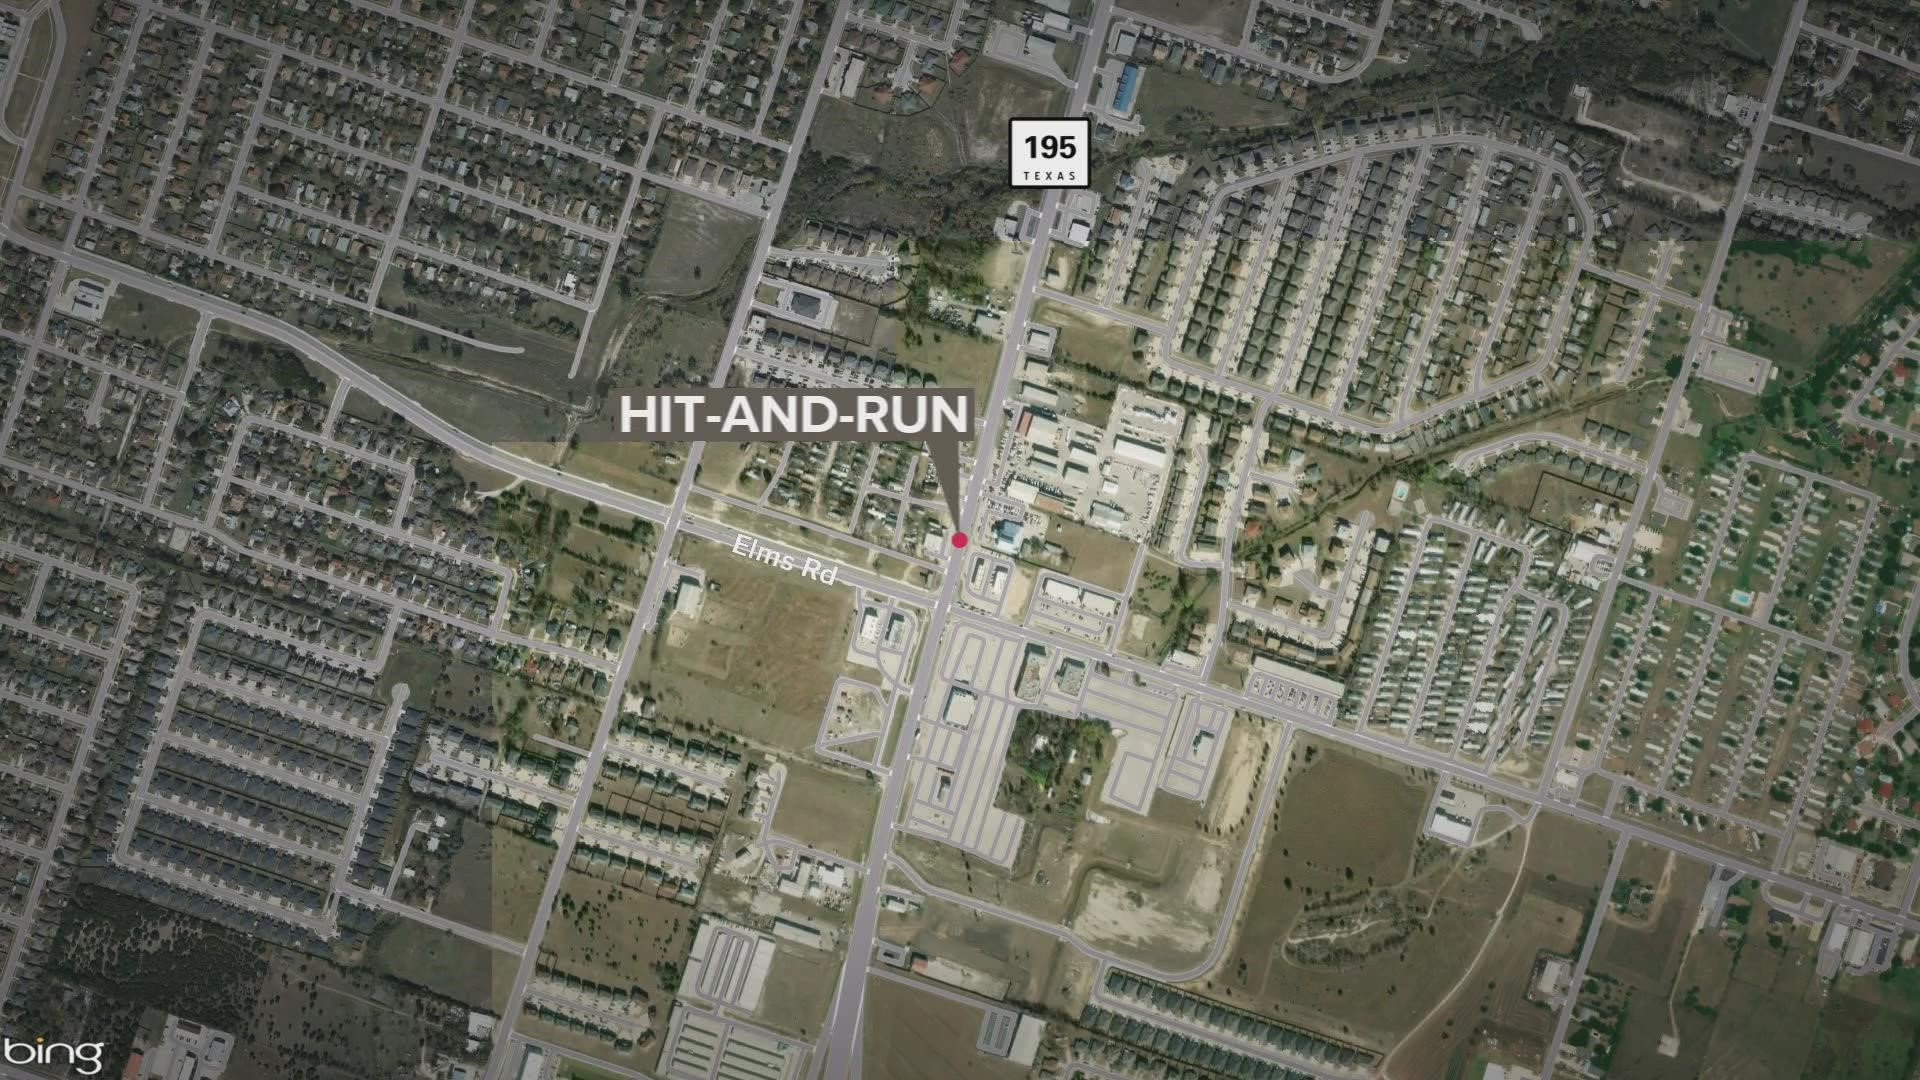 The accident happened Sunday night on the 3100 block of S. Fort Hood Street